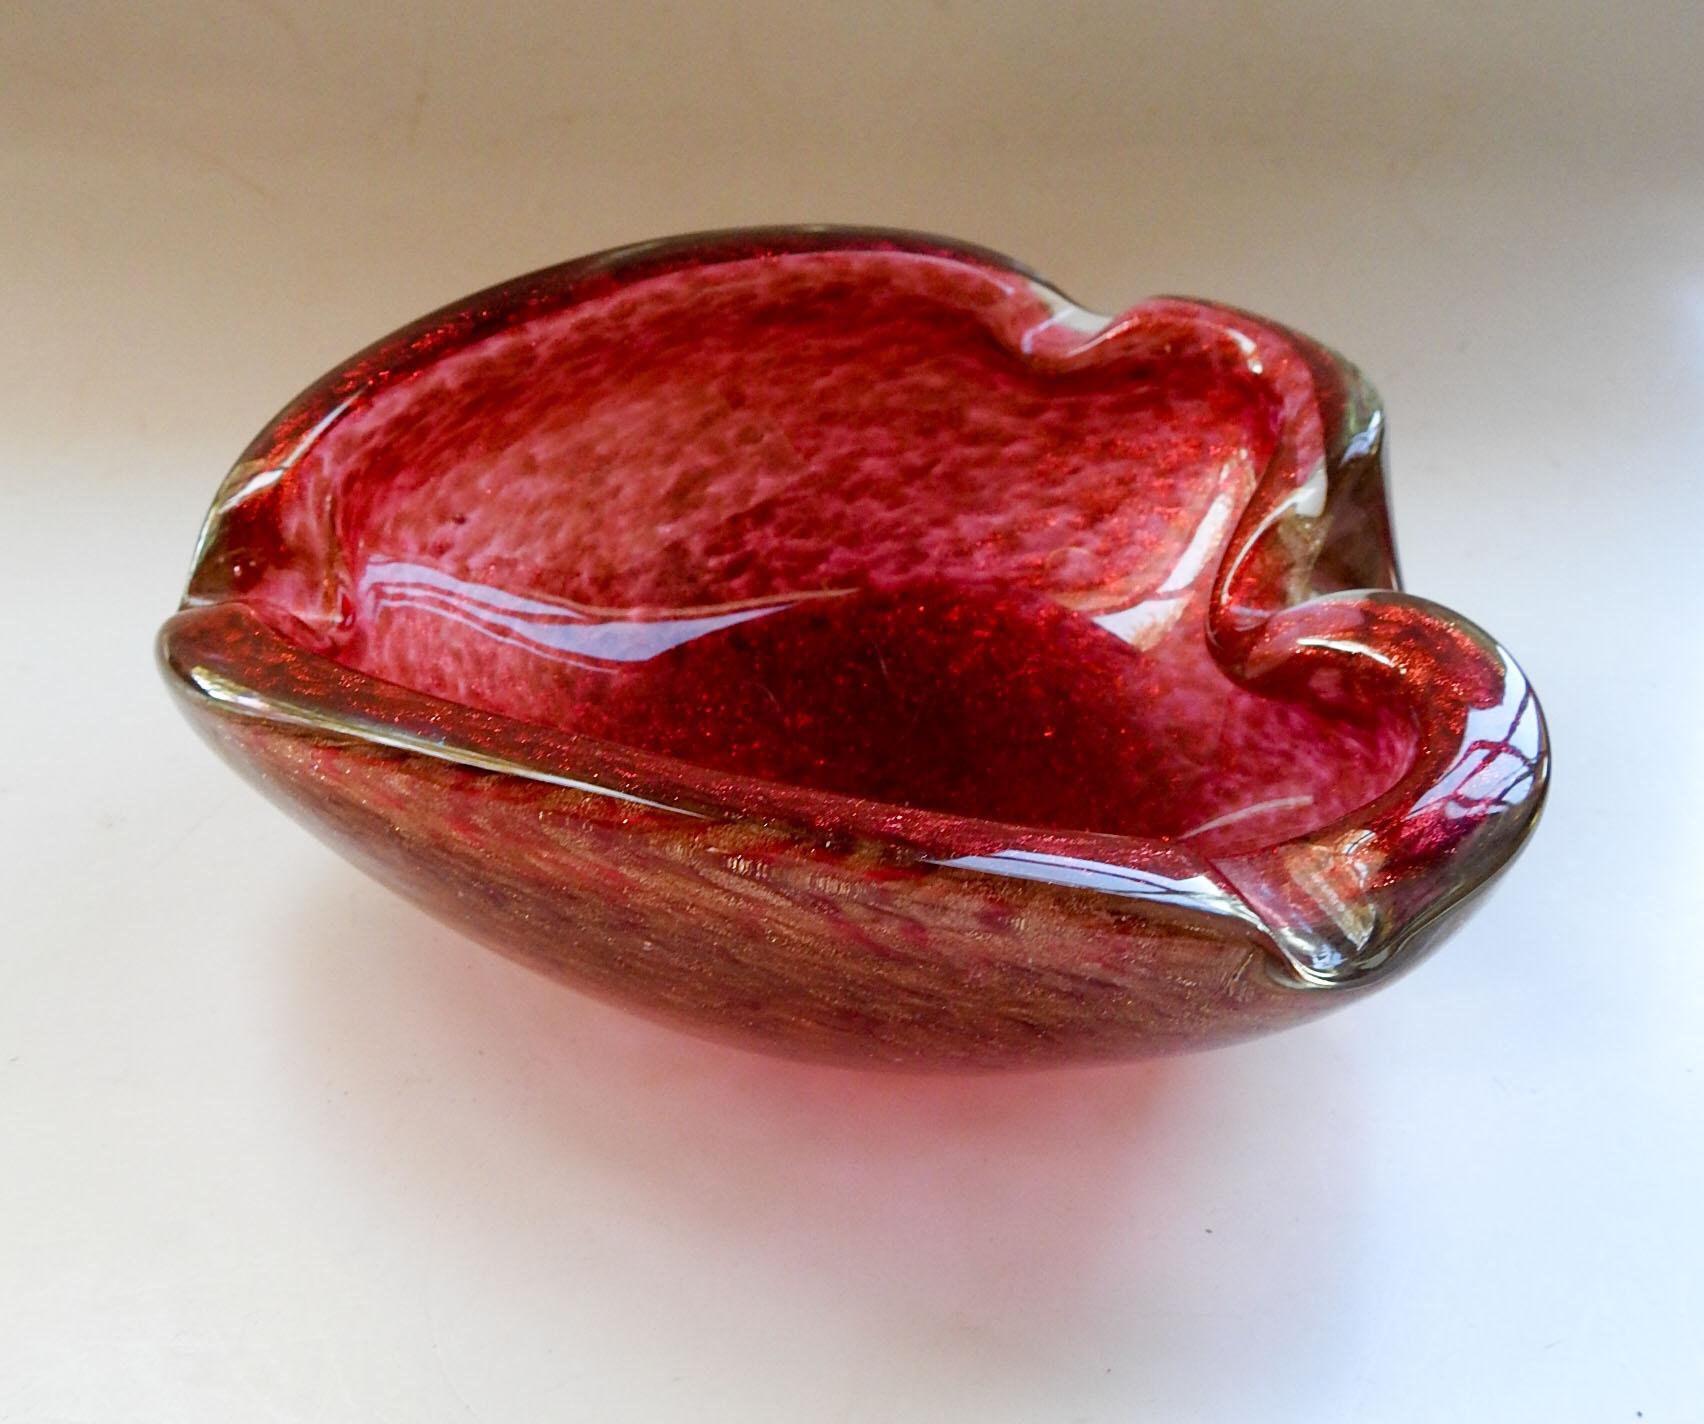 Vintage dark pink with gold metallic flecks Murano glass bowl or ashtray. Heart shaped, felt pads on bottom, one small scratch on outside surface.